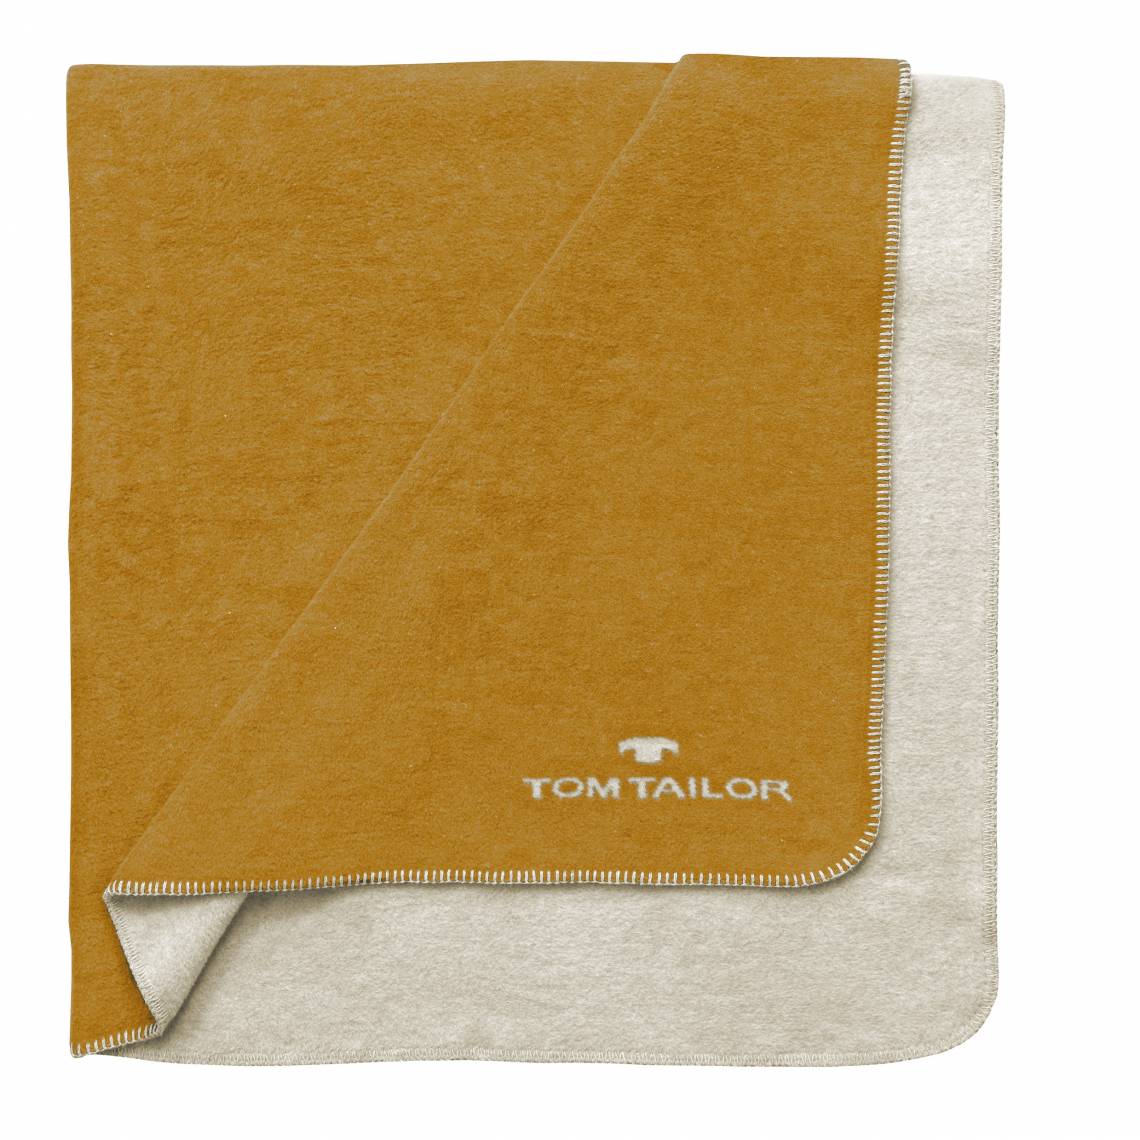 Tom Tailor Double Face Blanket 229938-855